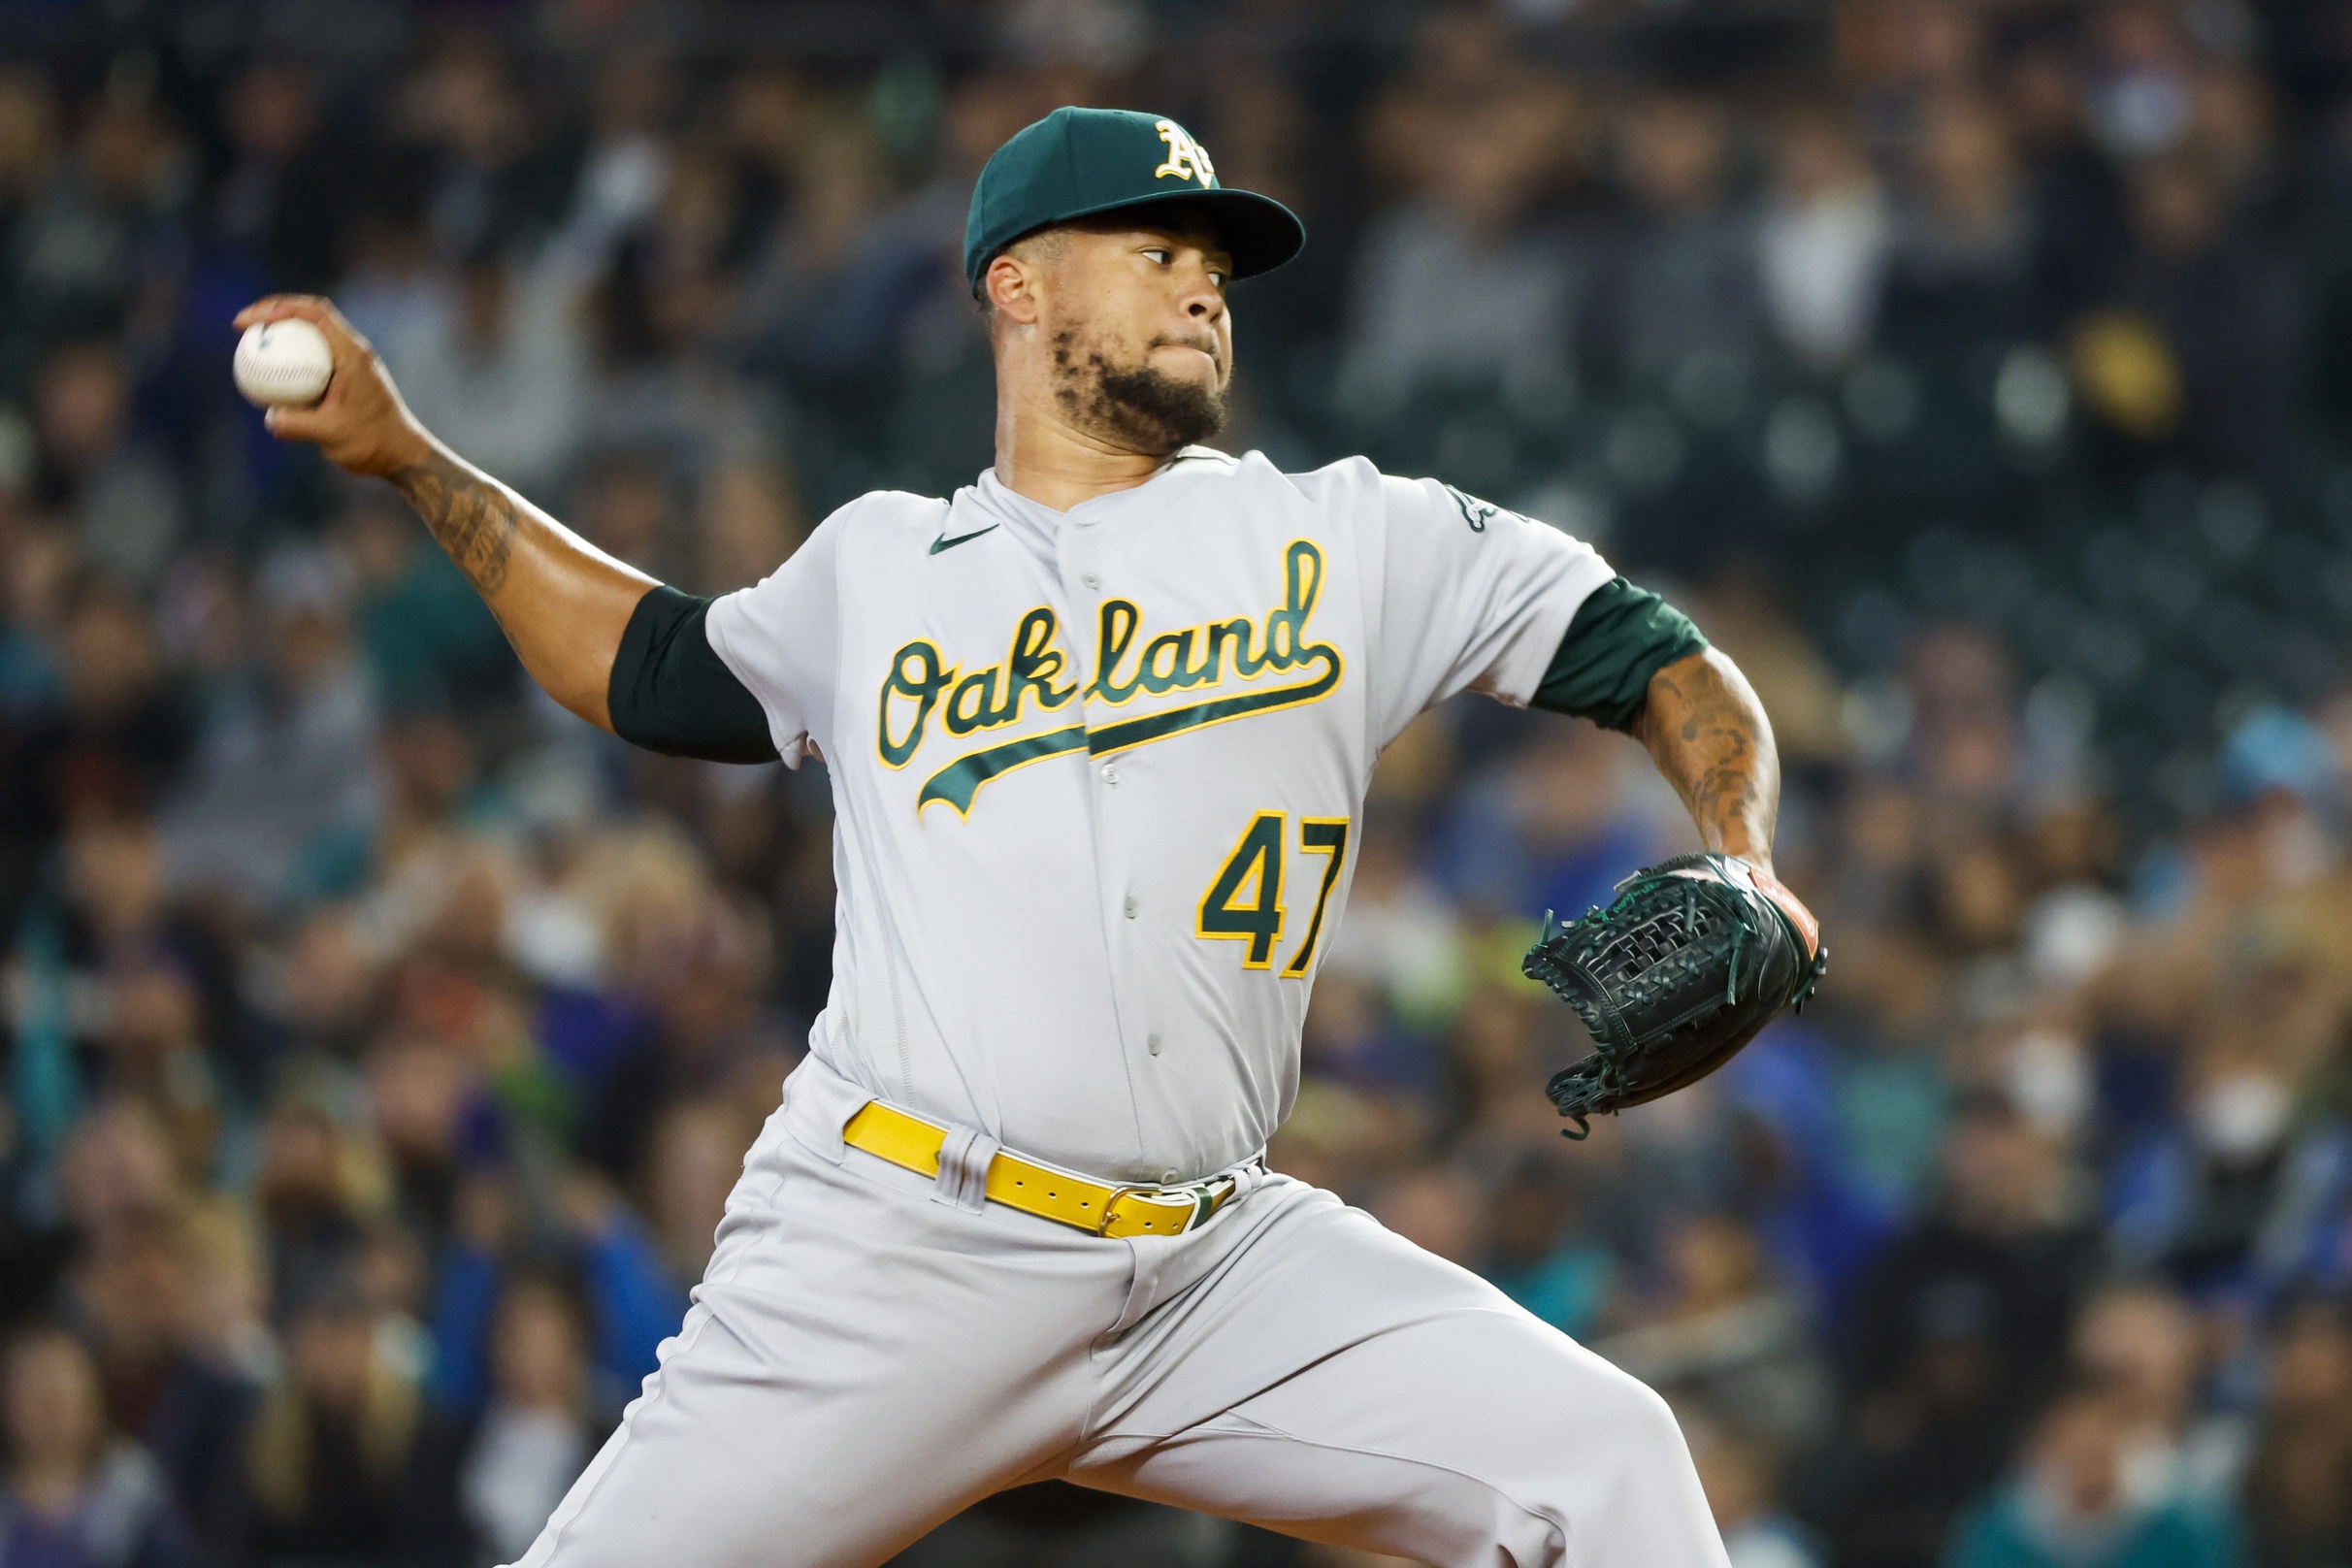 Oakland Athletics lose right-handed pitcher Lou Trivino for season